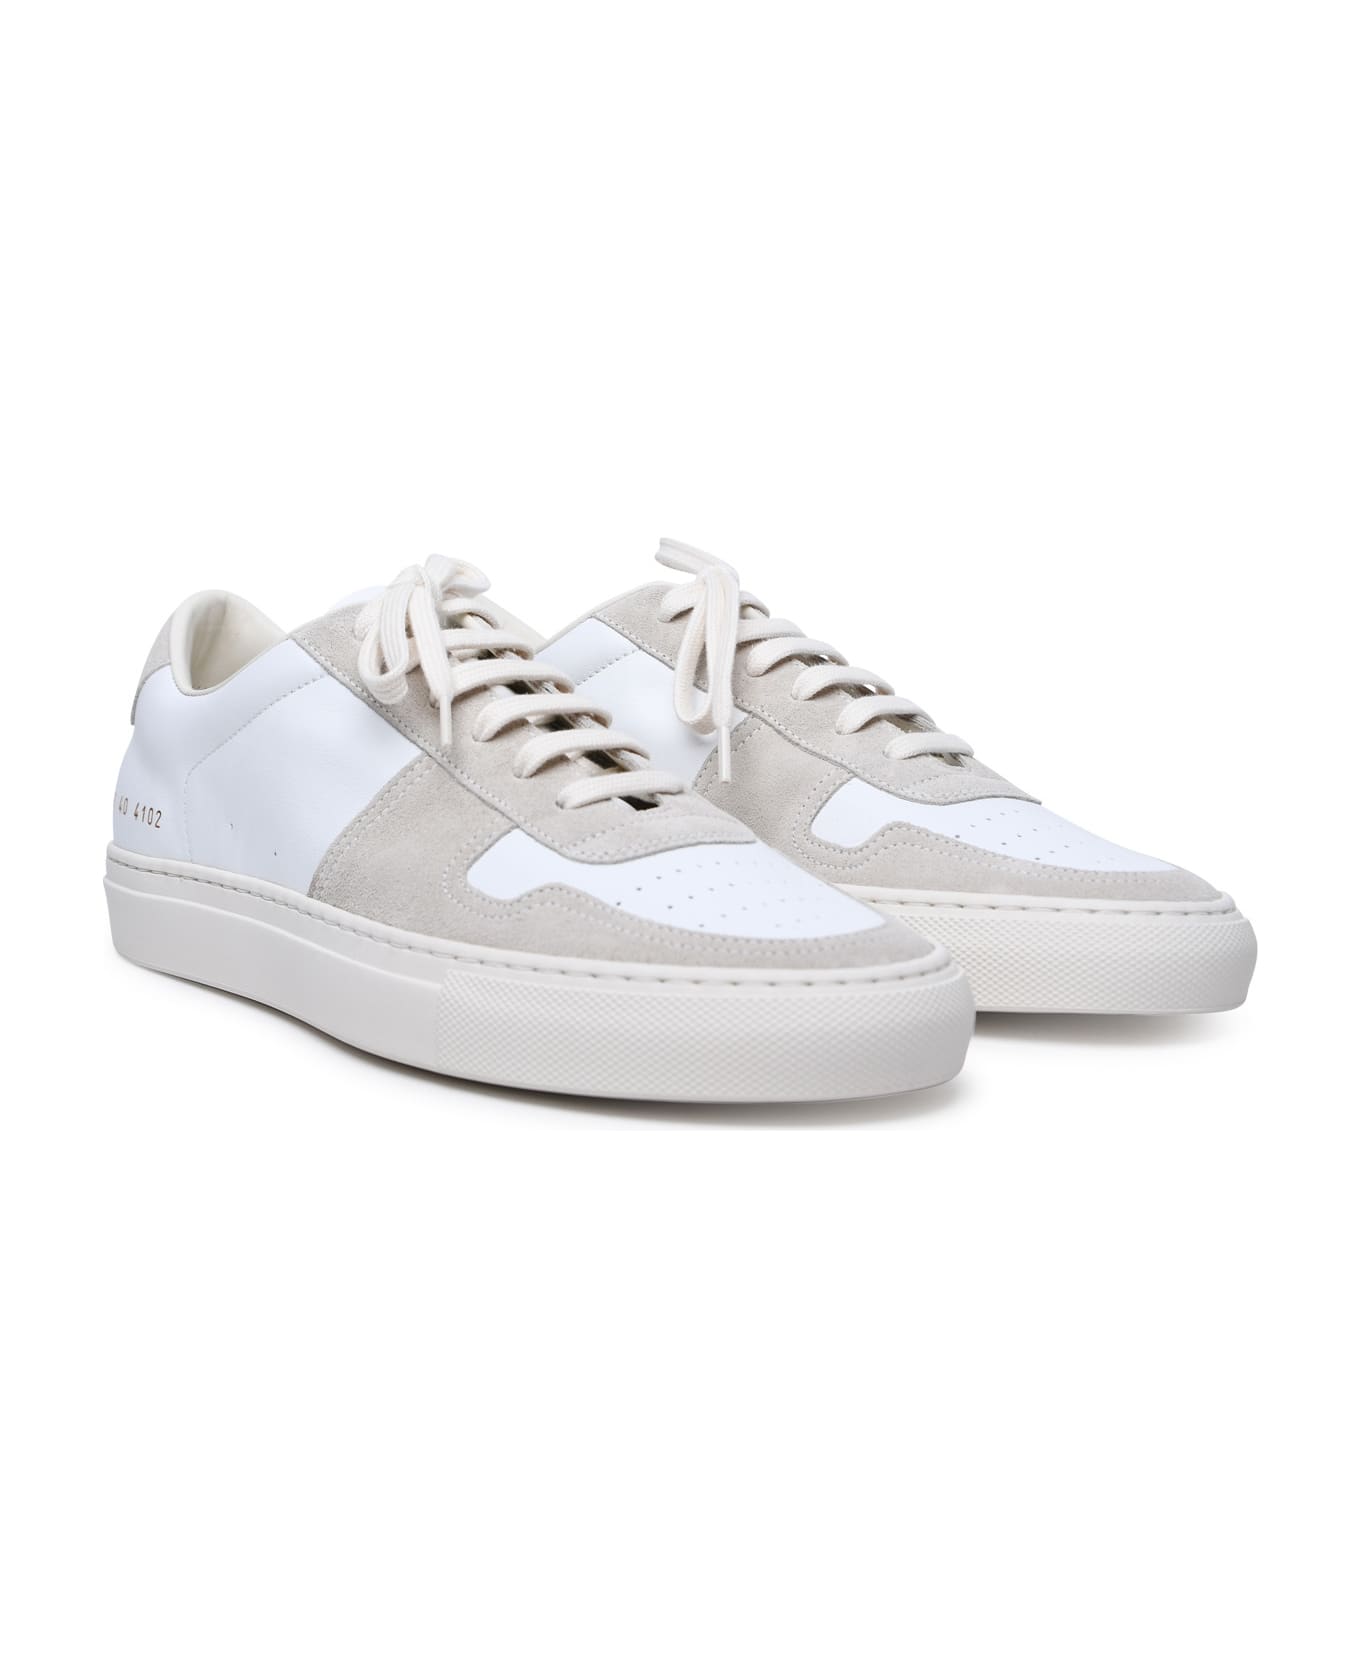 Common Projects Bball Duo Sneakers - White スニーカー